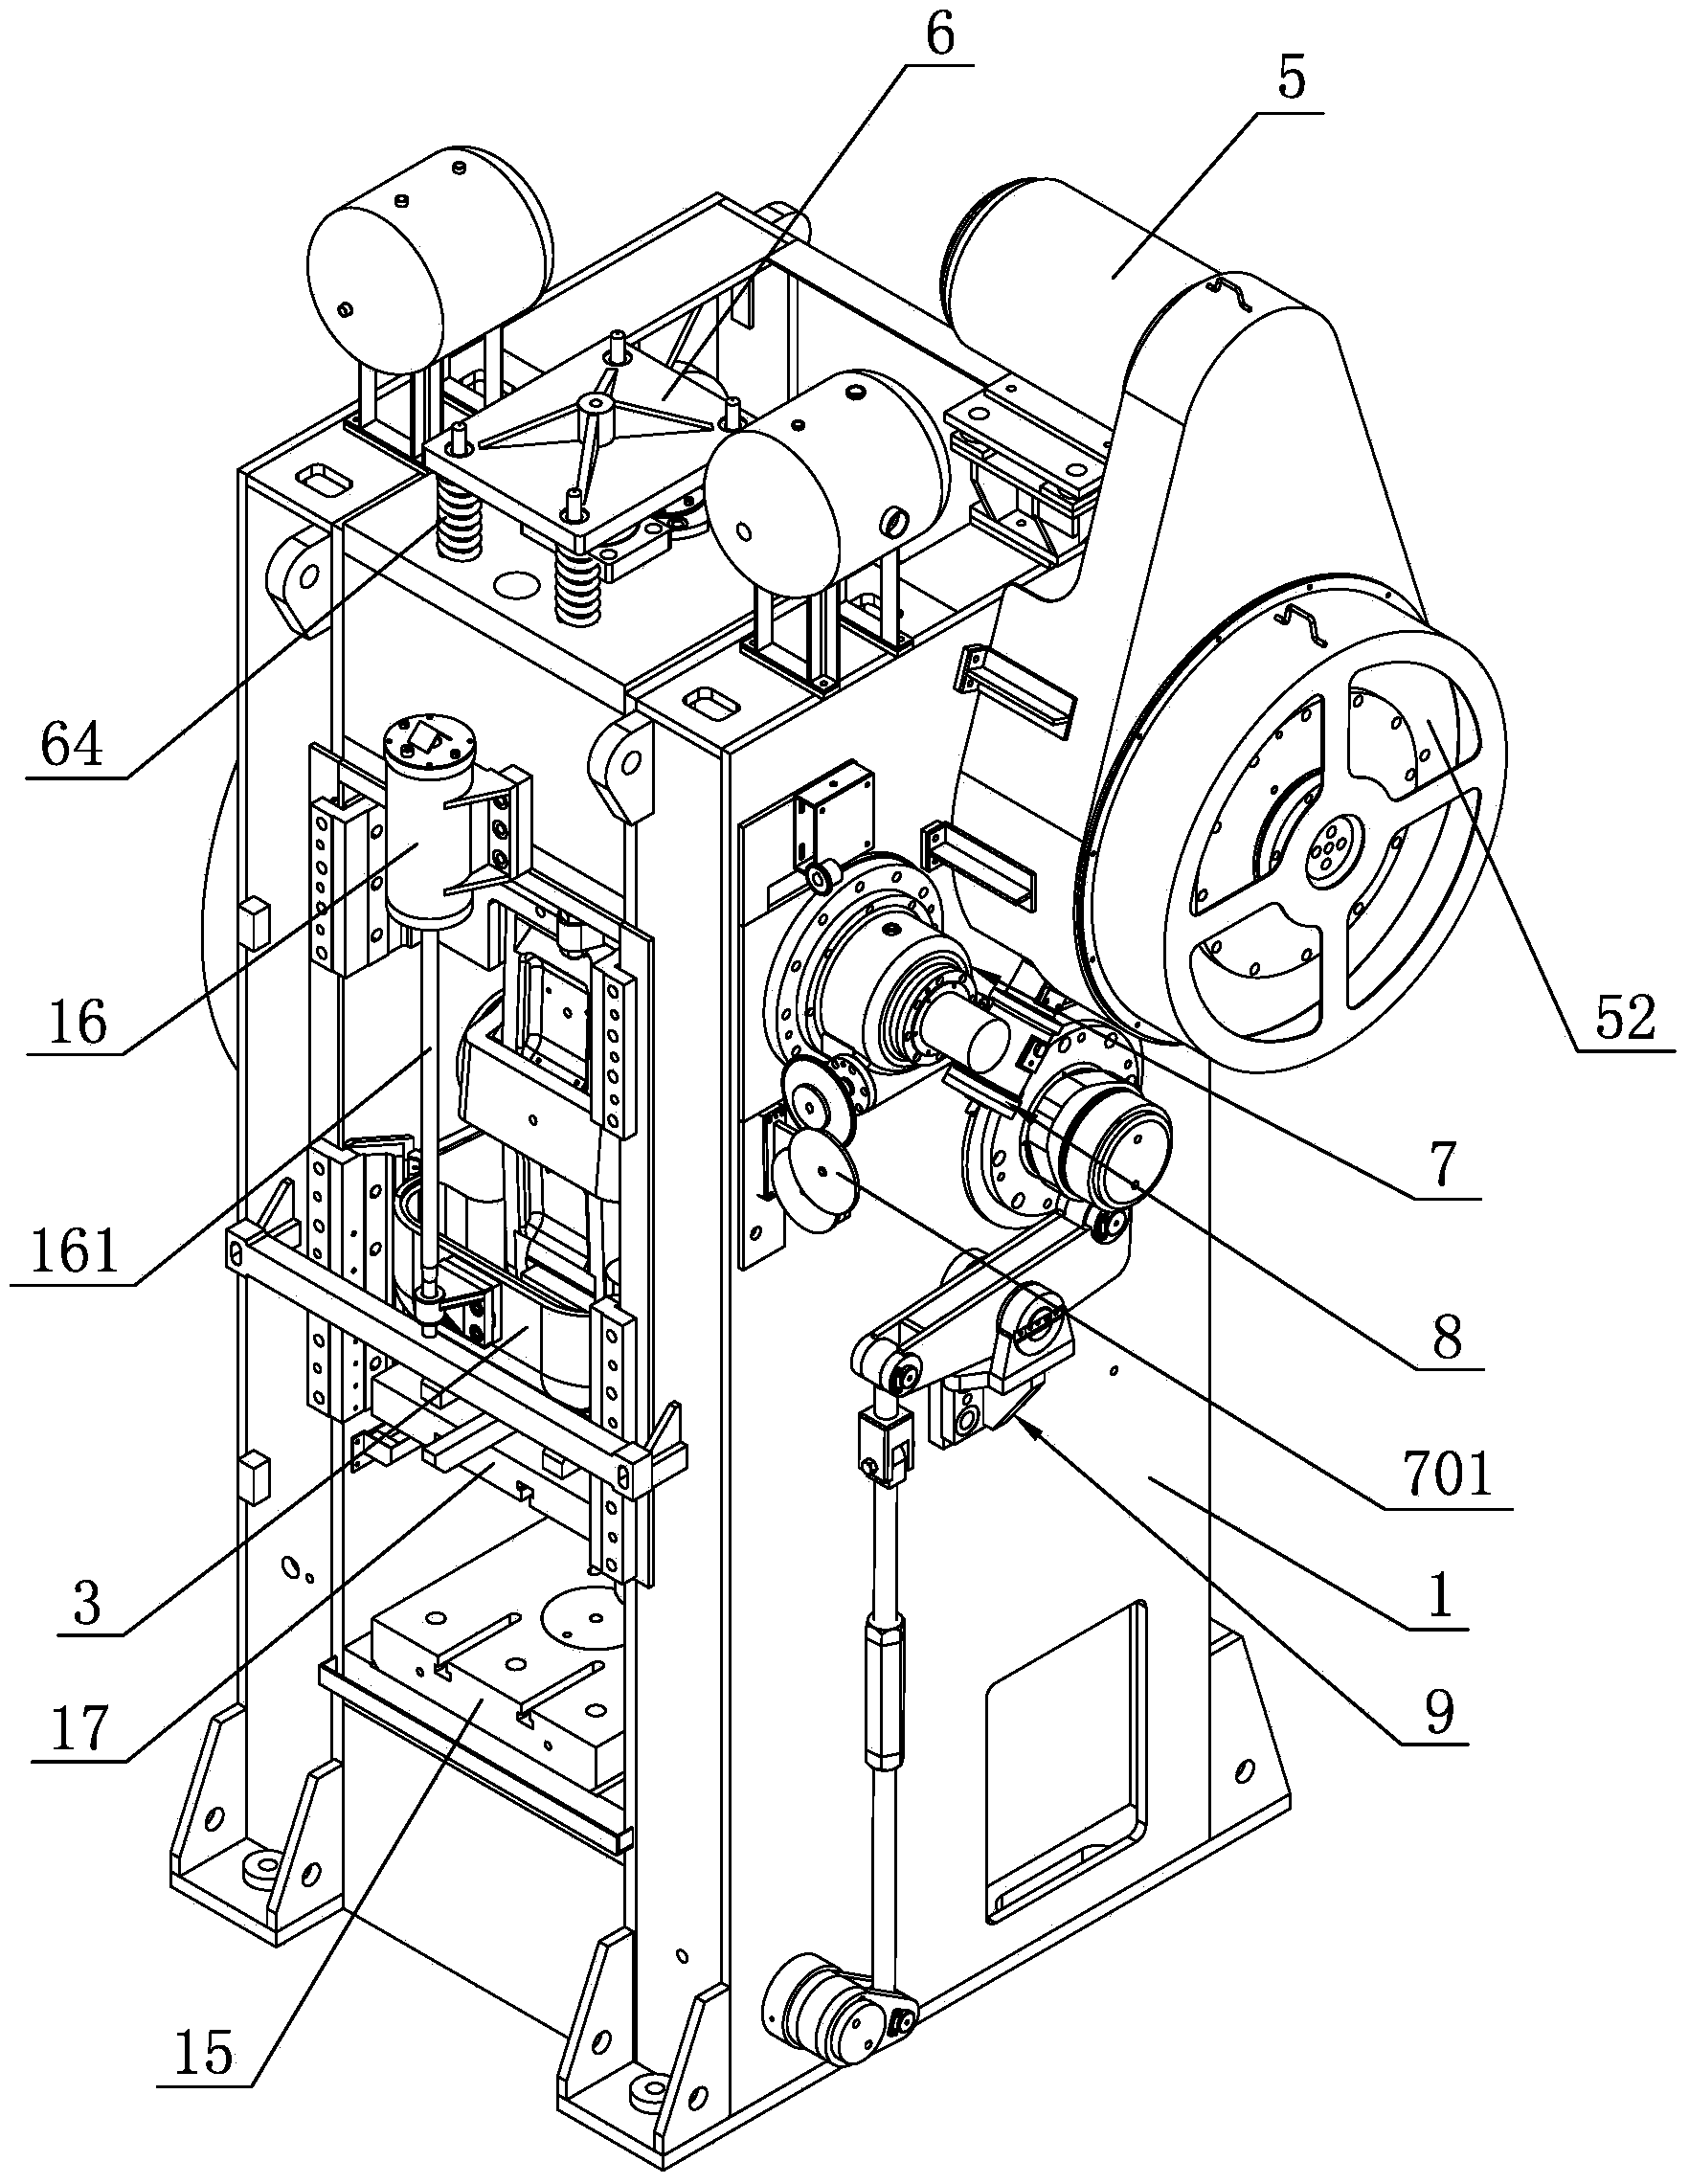 Connecting rod punch press